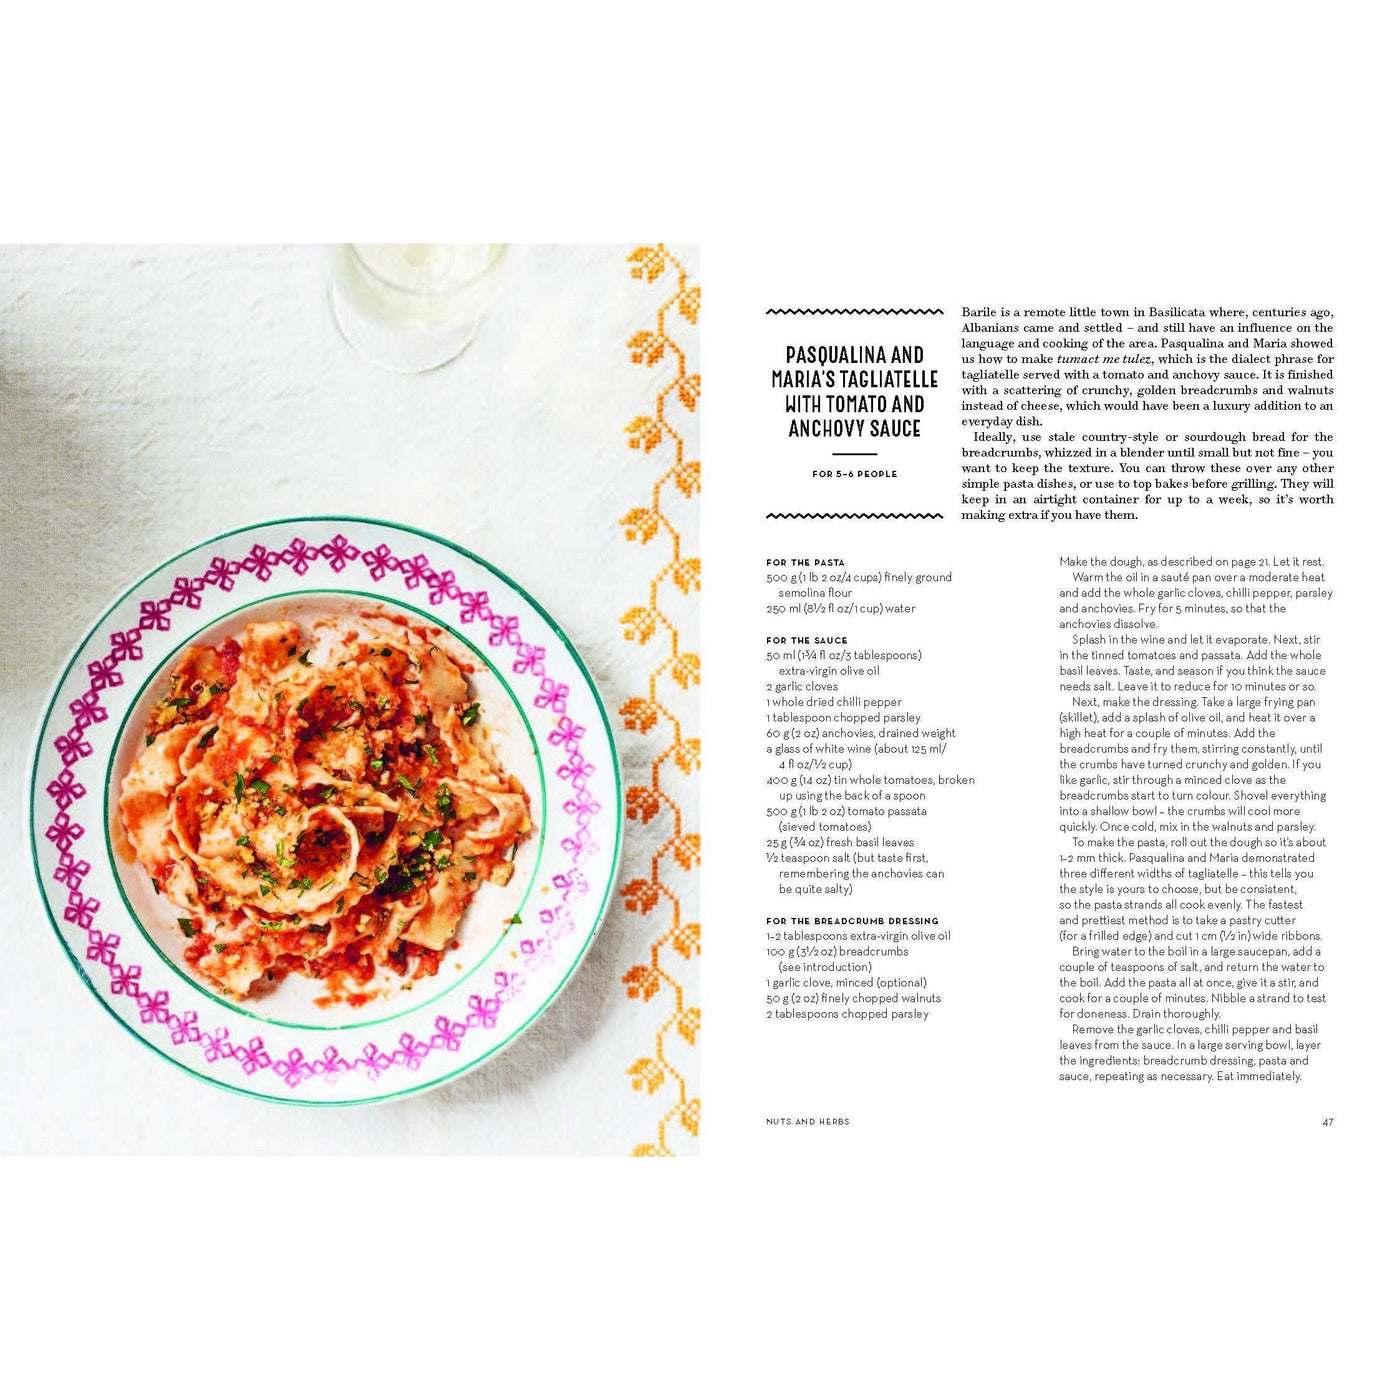 Pasta Grannies: The Official Cookbook: The Secrets Of Italy's Best Home Cooks - Vicky Bennison